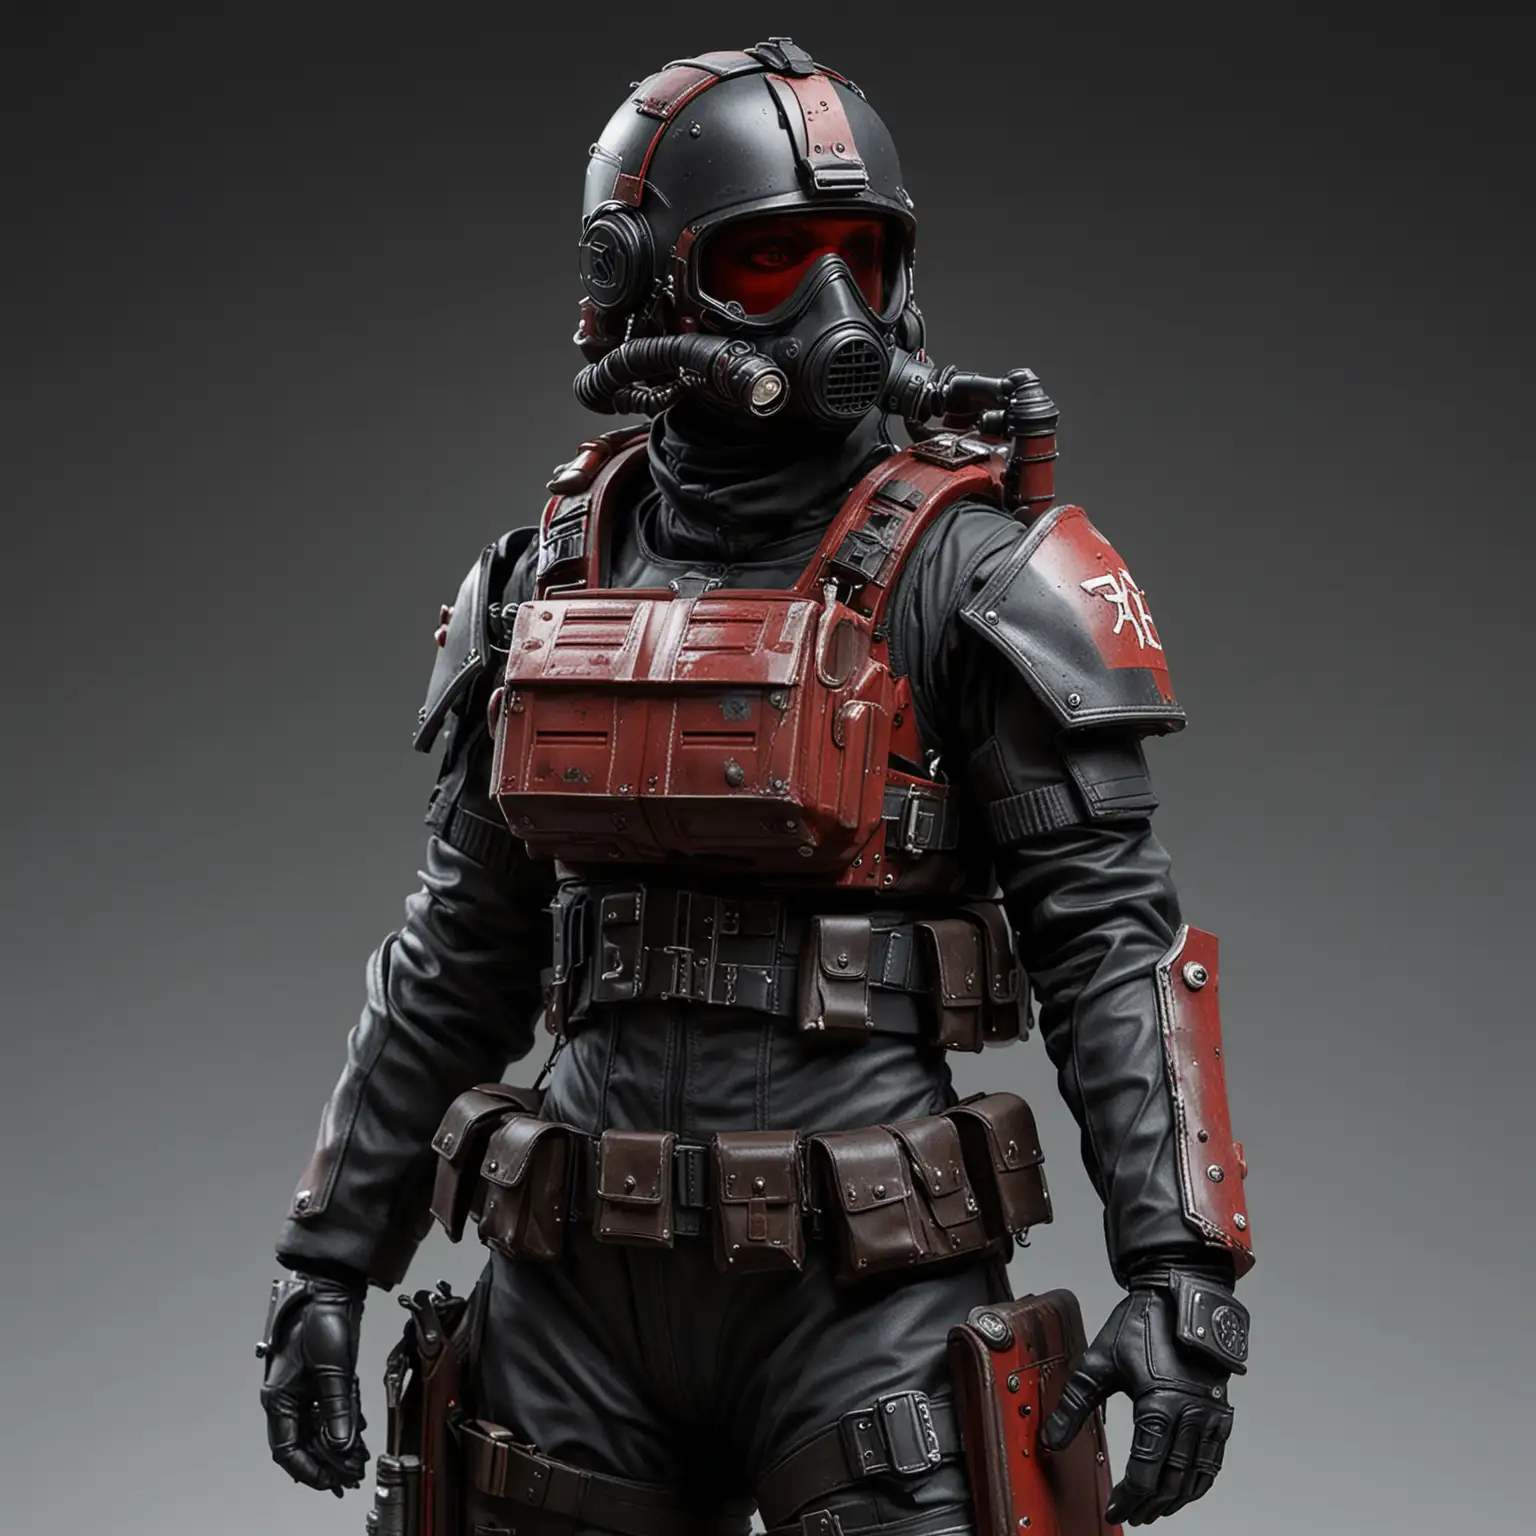 Female Warhammer 40k Imperial Guard Soldier in Closed Environment Suit with SMG and Air Tank Backpack